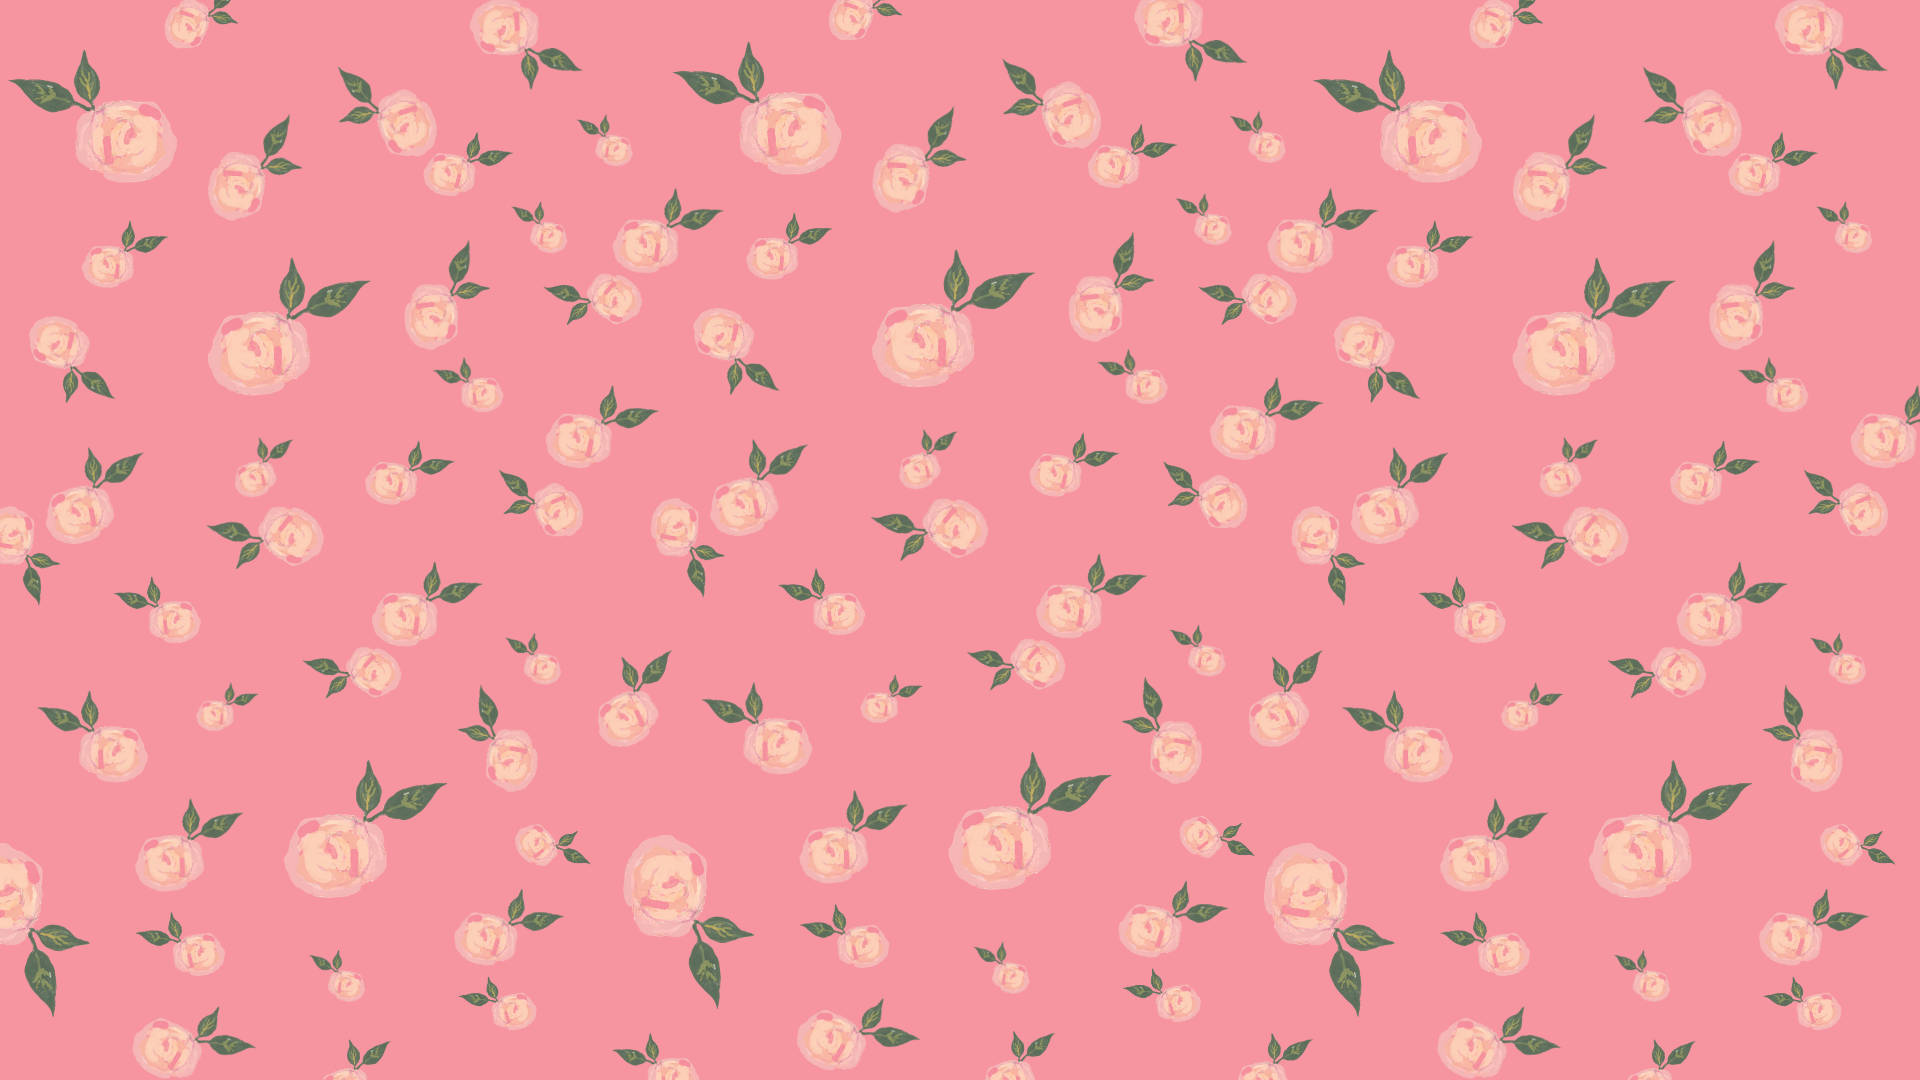 A Pink Floral Pattern With Leaves Wallpaper